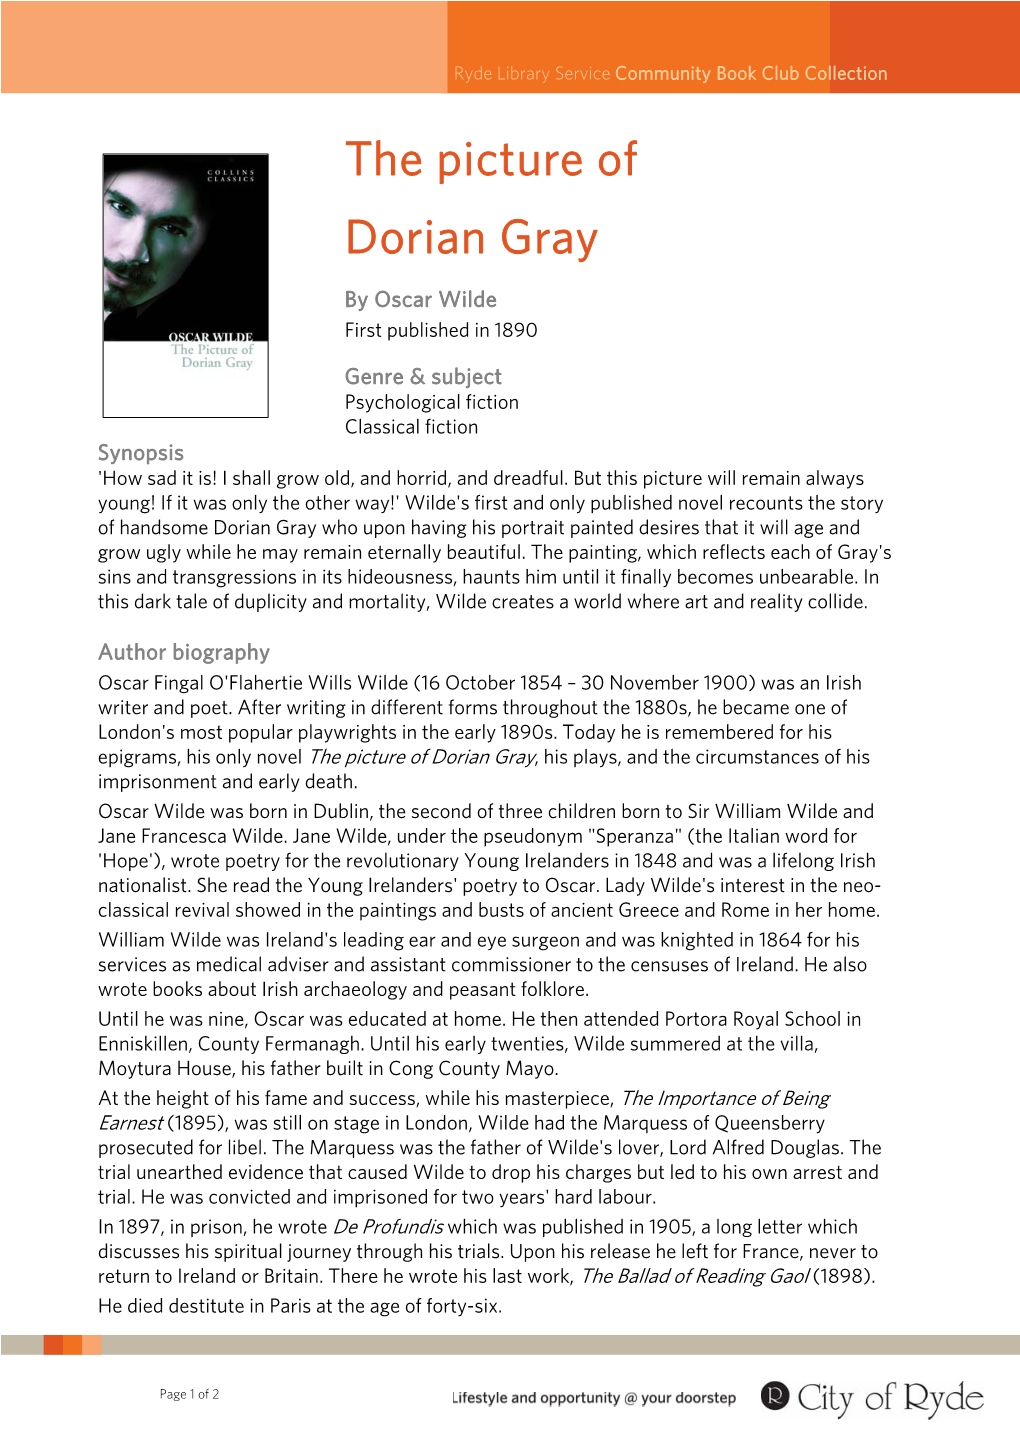 The Picture of Dorian Gray, His Plays, and the Circumstances of His Imprisonment and Early Death